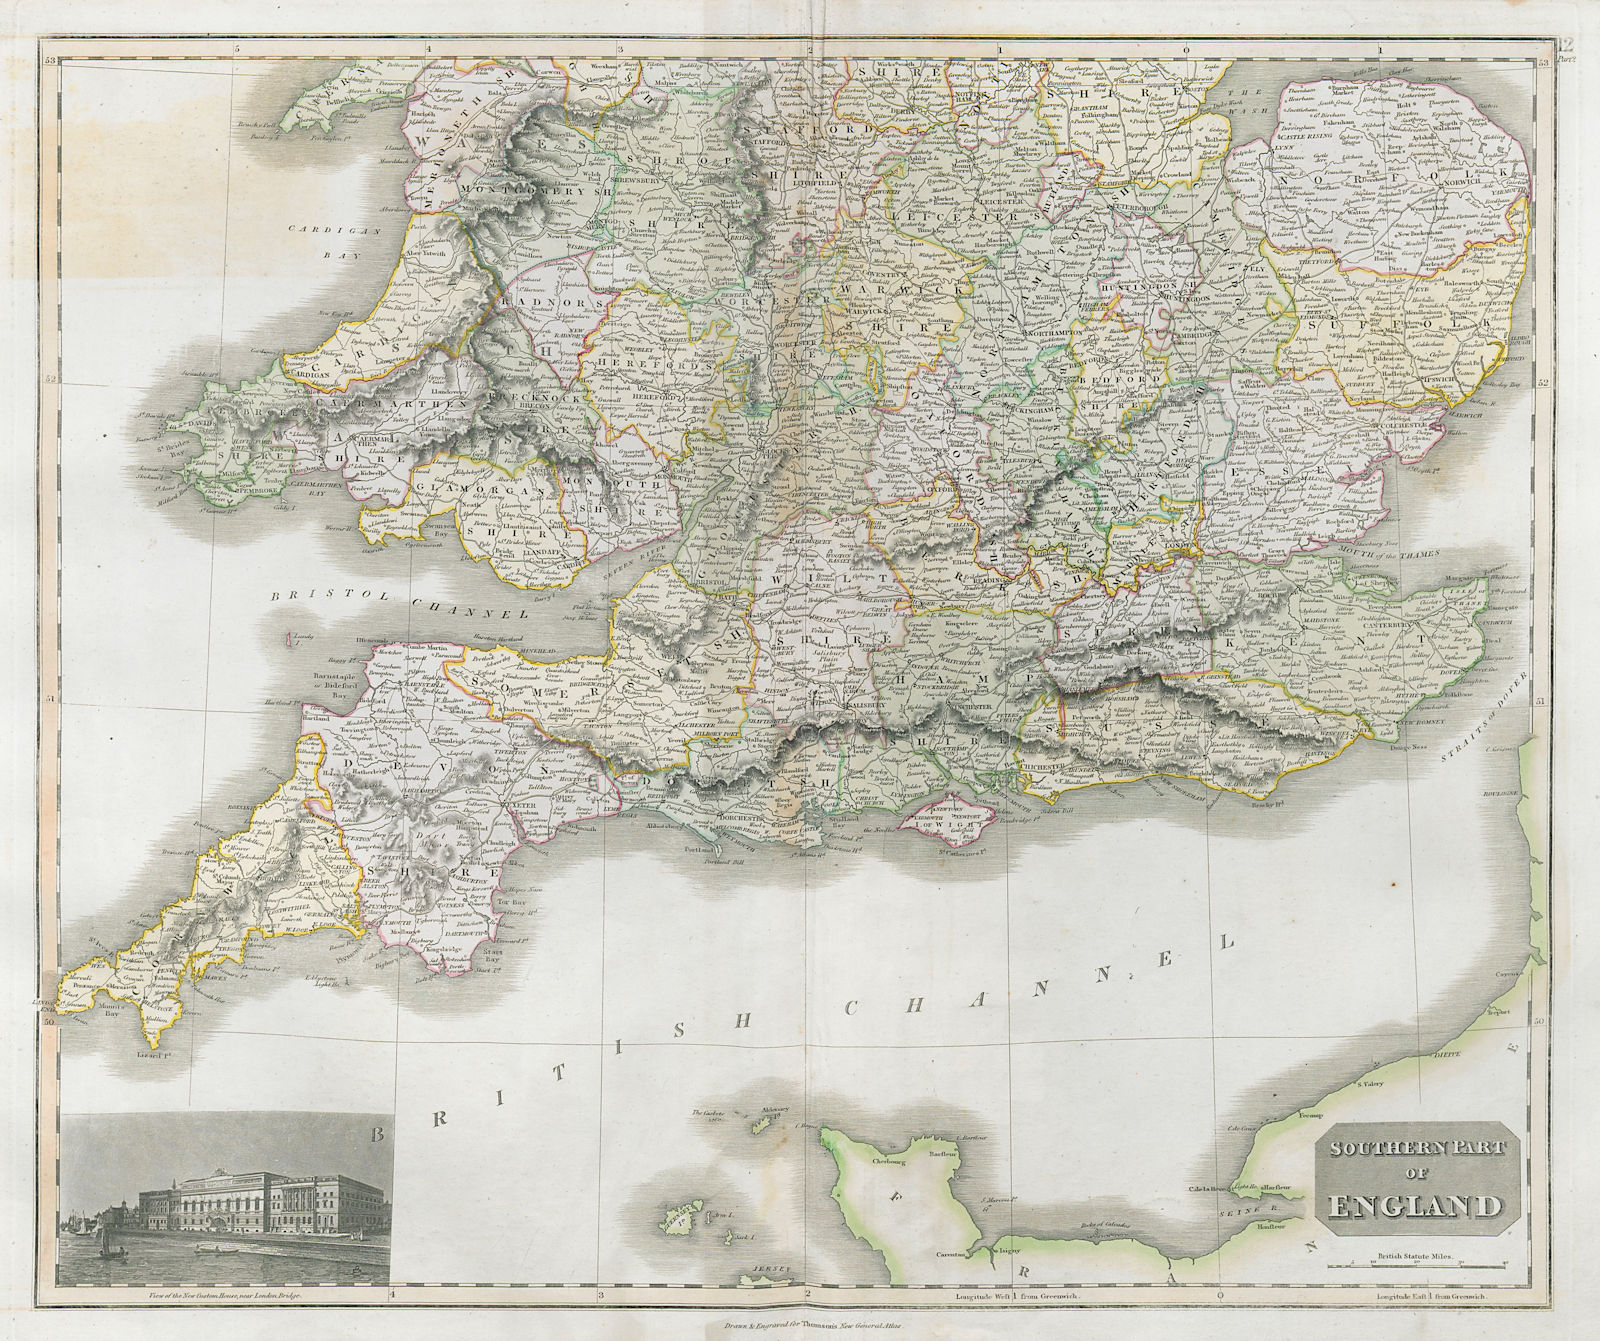 Associate Product Southern part of England, and Wales. Coach roads. THOMSON 1830 old antique map